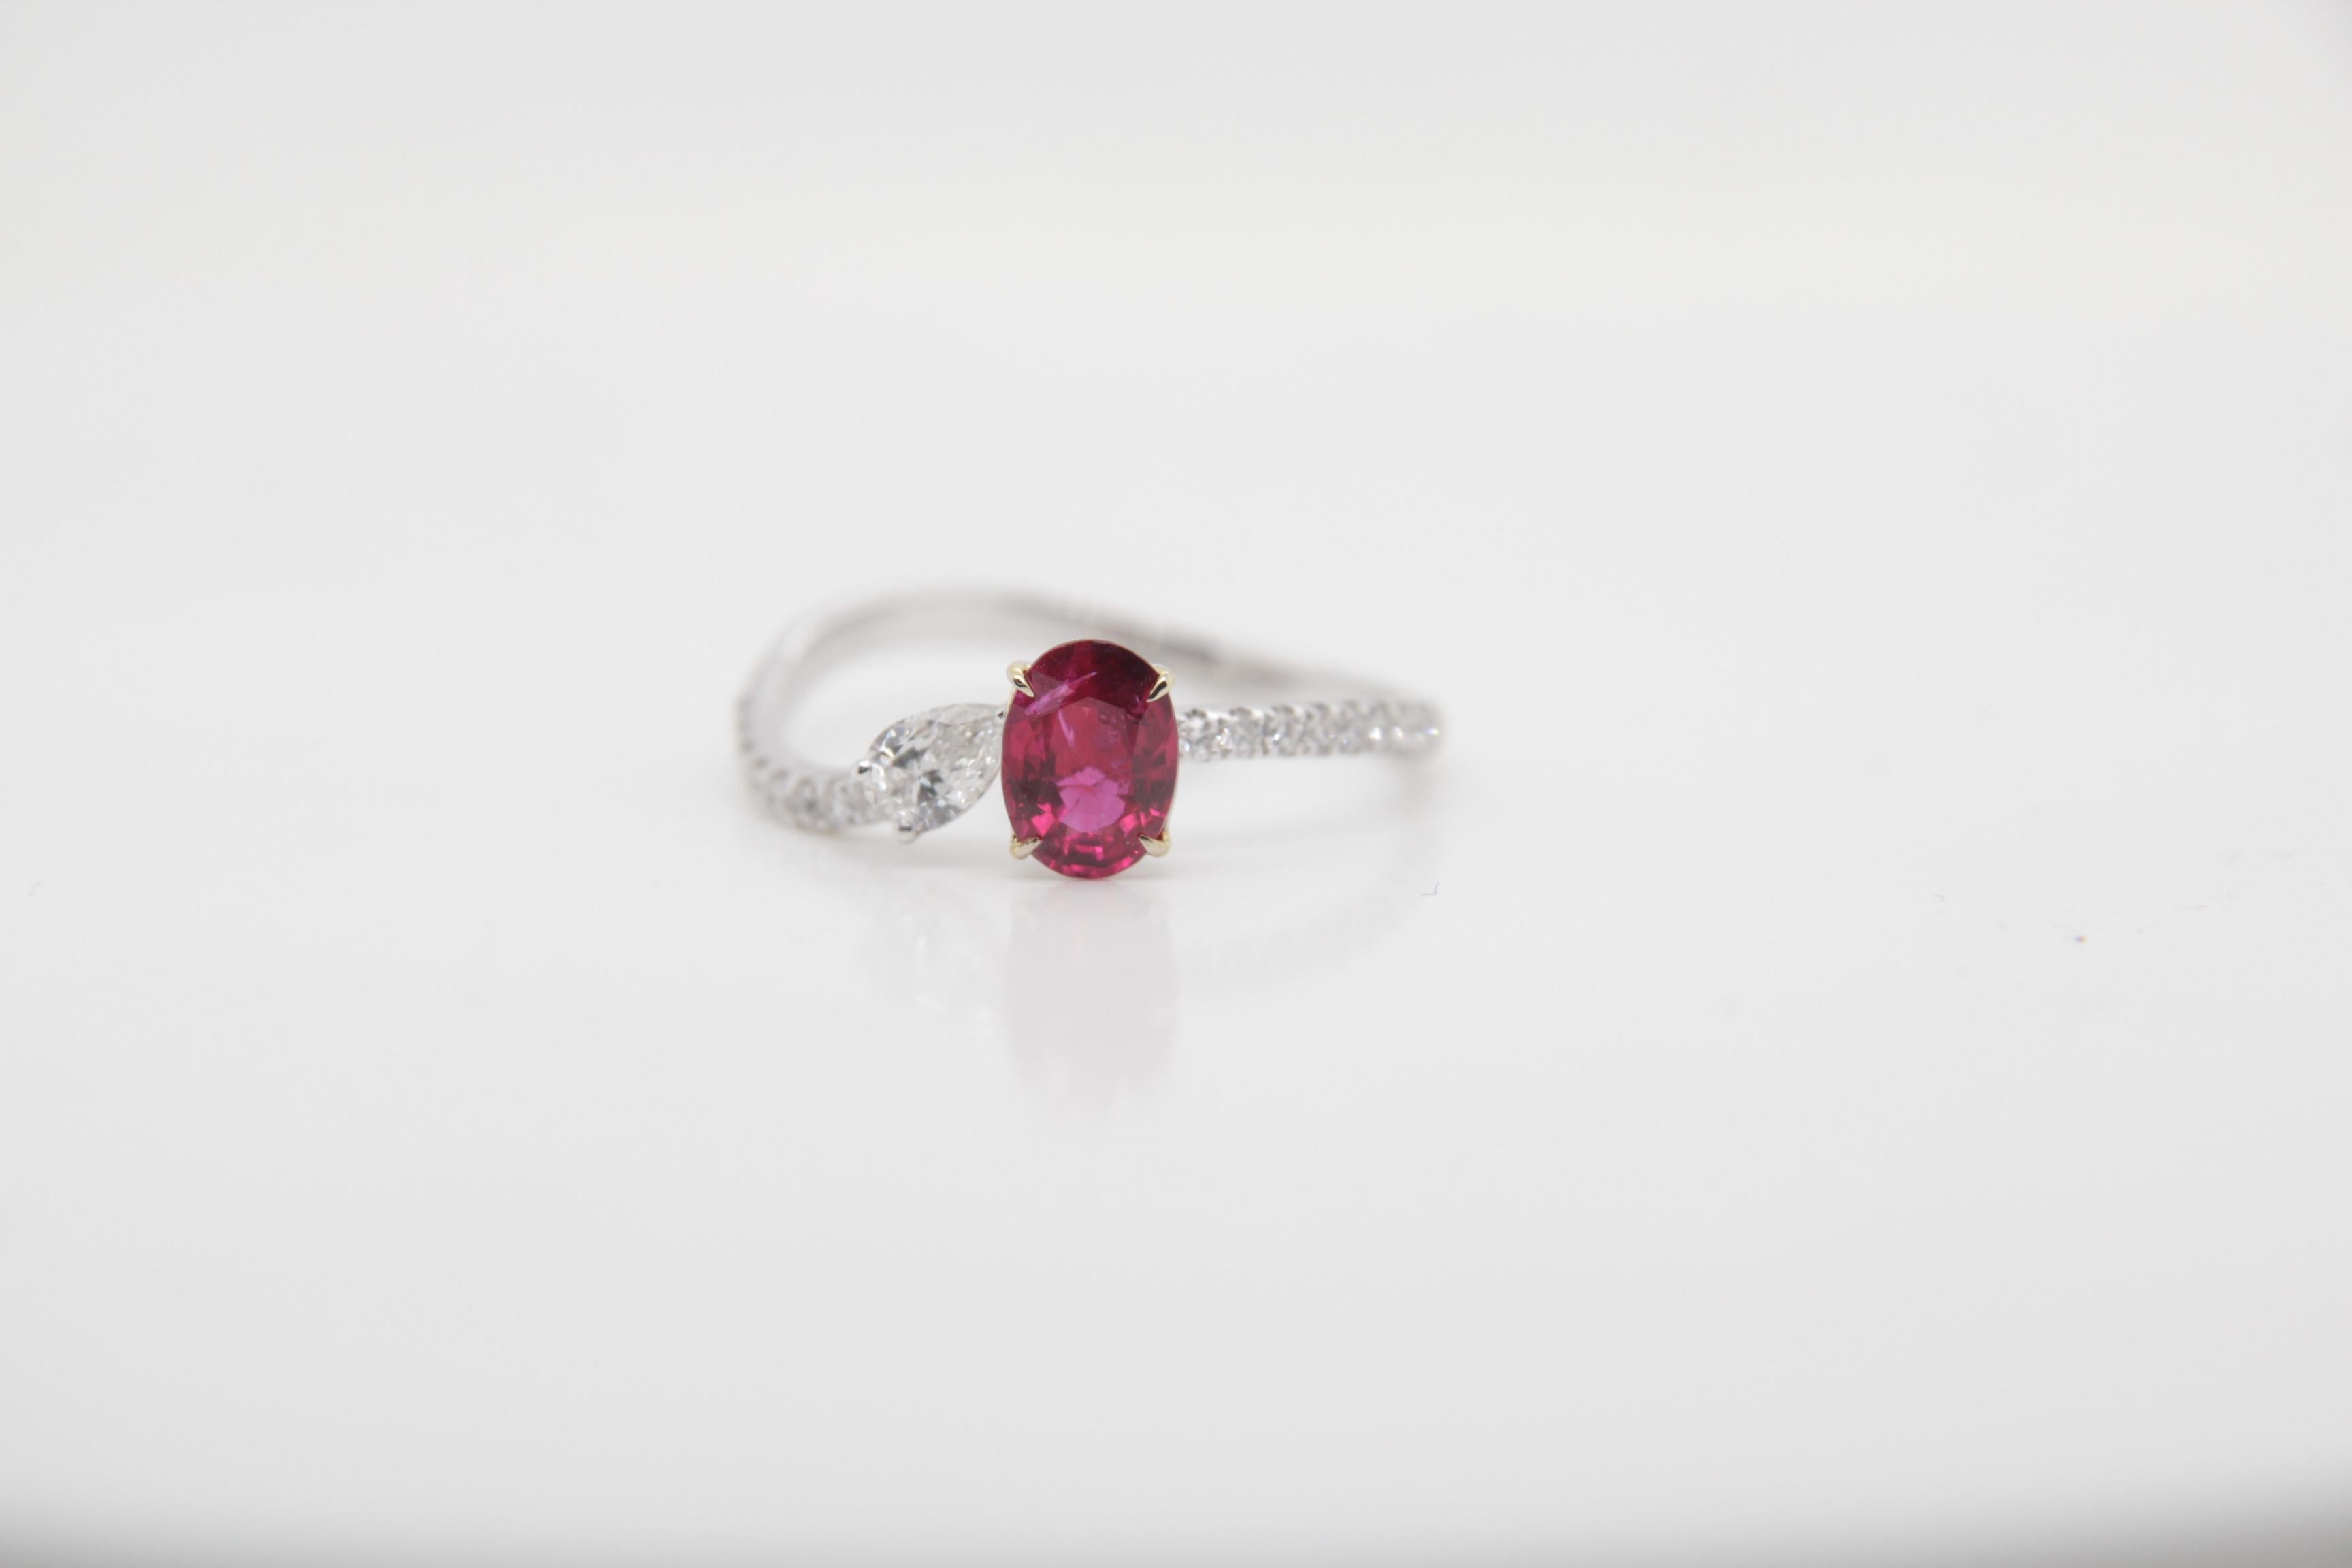 A brand new handcrafted ruby ring by Rewa Jewels. The ring's center stone is 0.70 carat Burmese ruby certified by Gem Research Swisslab (GRS) as natural, unheated, 'Pigeon blood' with the certificate number: 2022-010674. The piece has been set with